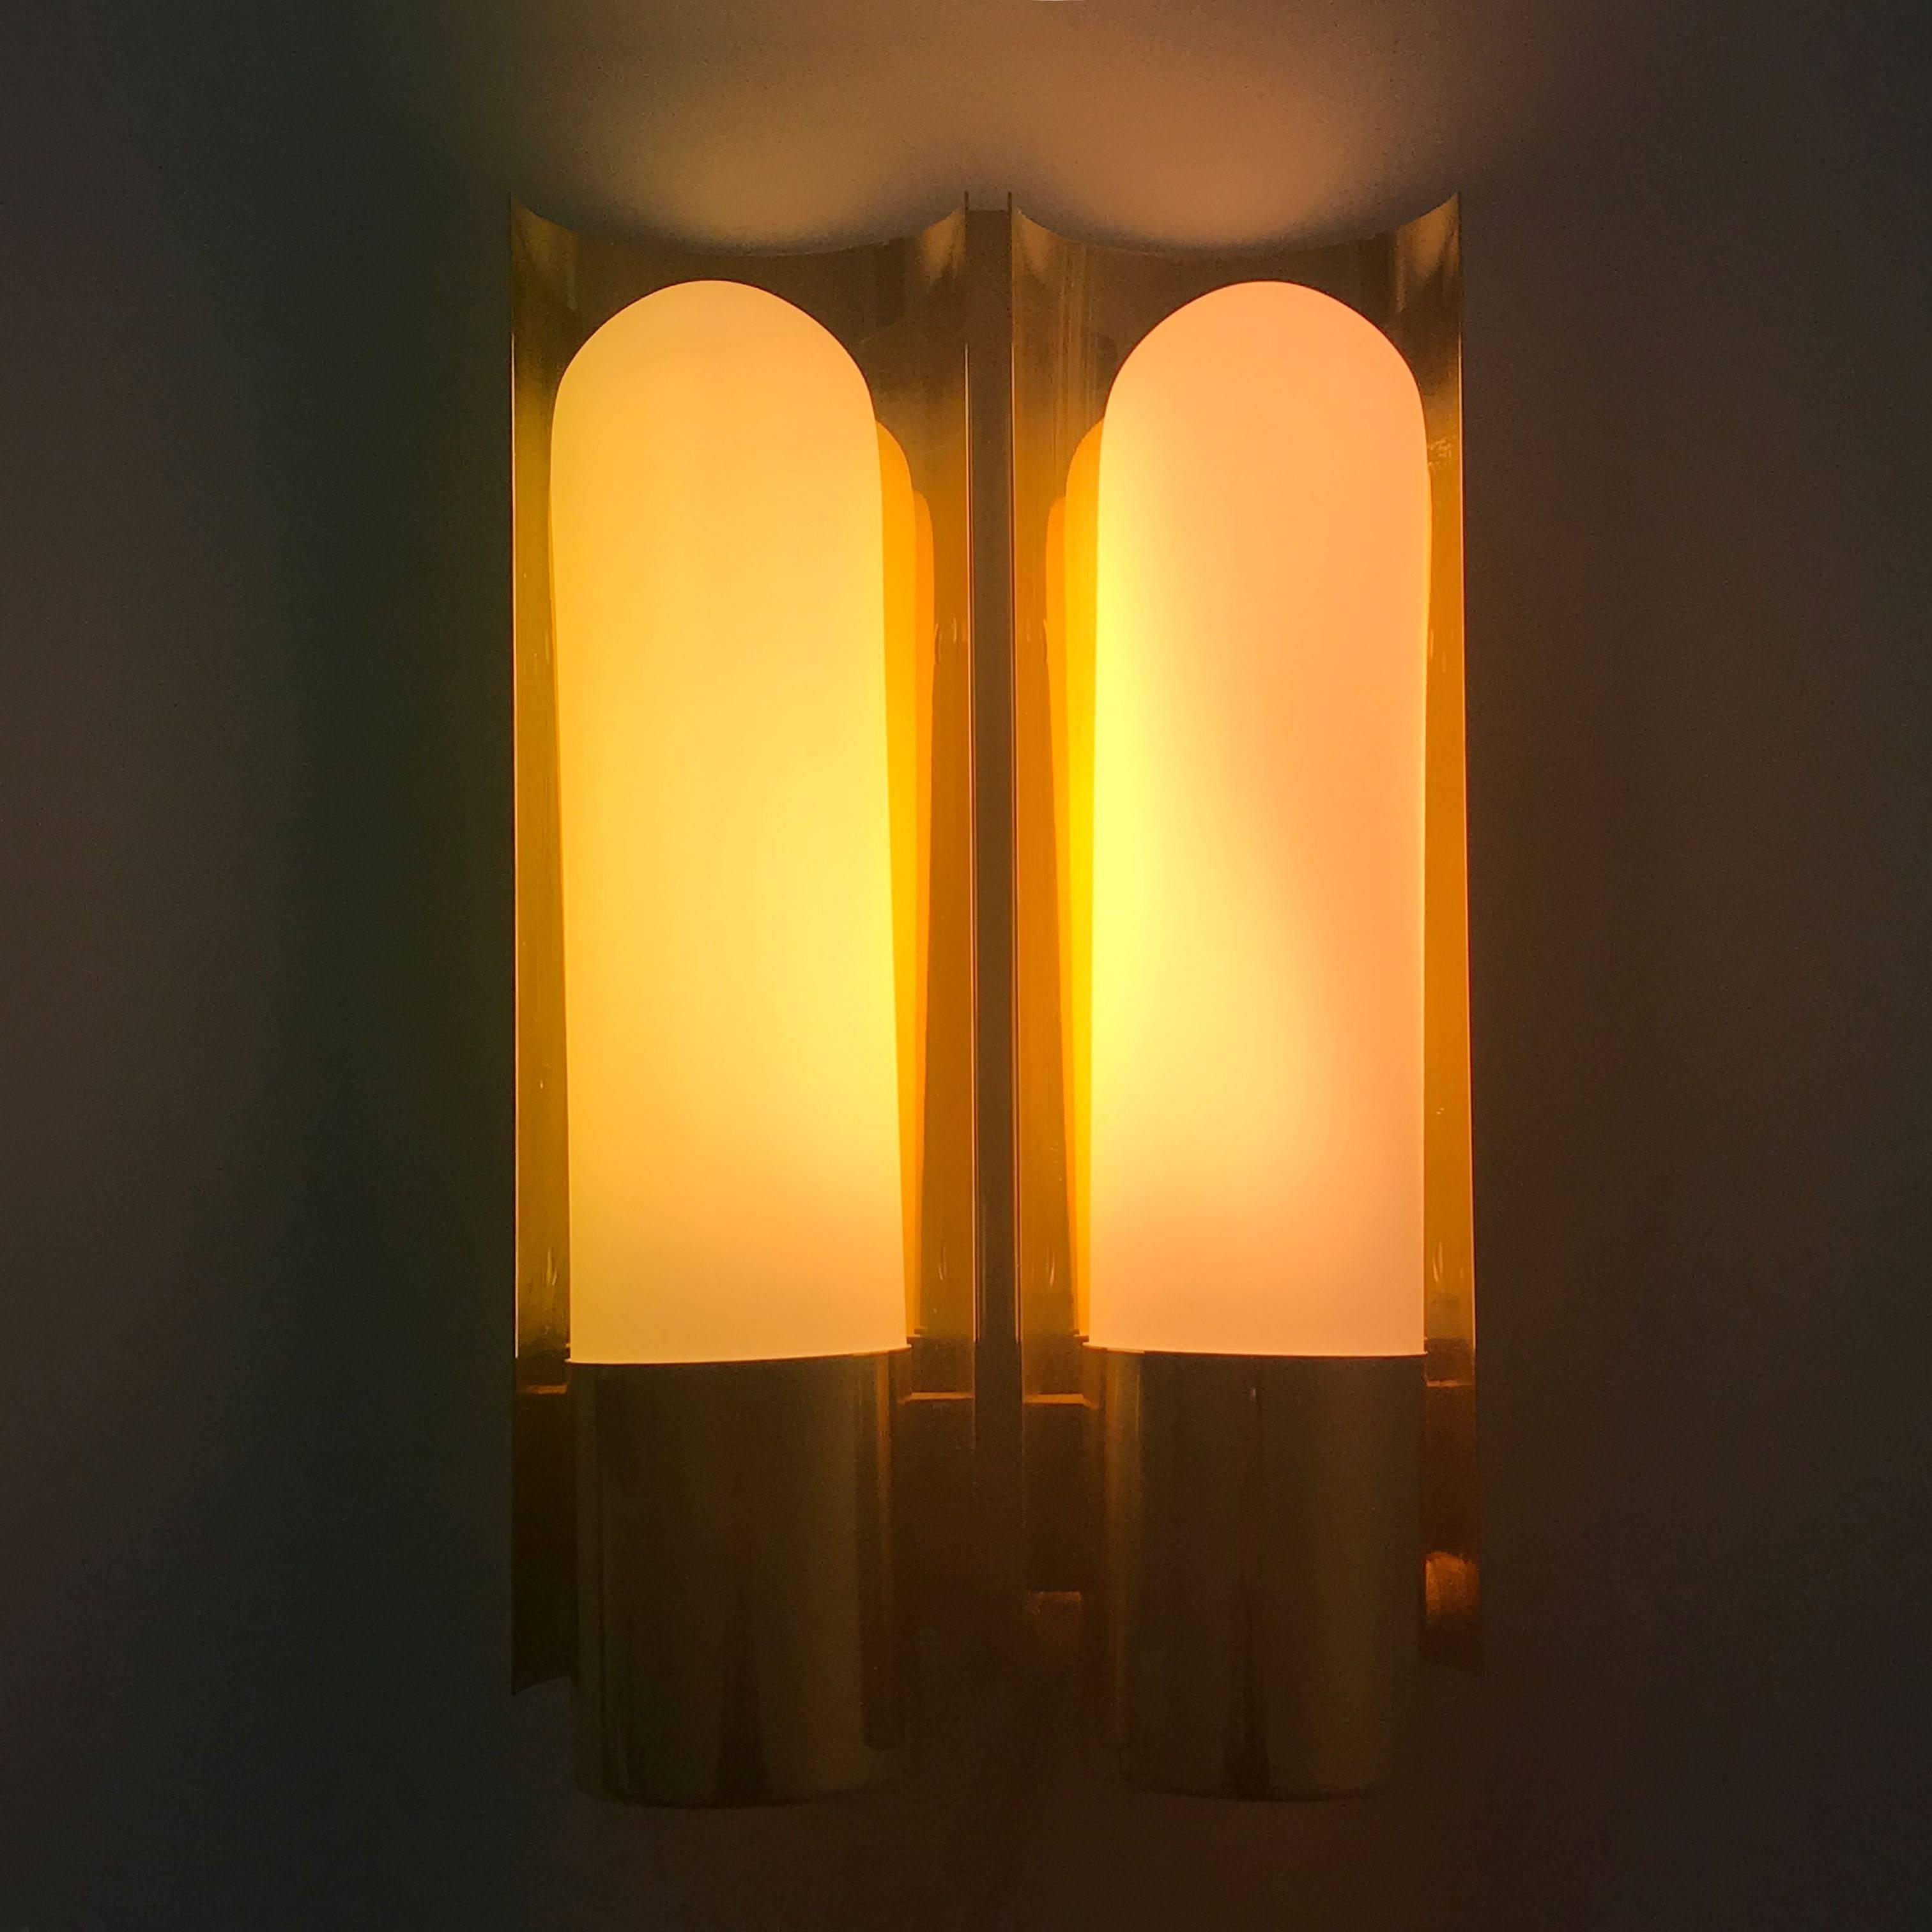 Elegant Mid Century Modern sconces or wall lamps. Designed and manufactured by Glashütte Limburg, Germany, 1980s.

Executed in brass and opaline glass, the lamp needs two TC 11W. 220 Volt. It works on 230 Volt. For use on 110 Volt, you need to